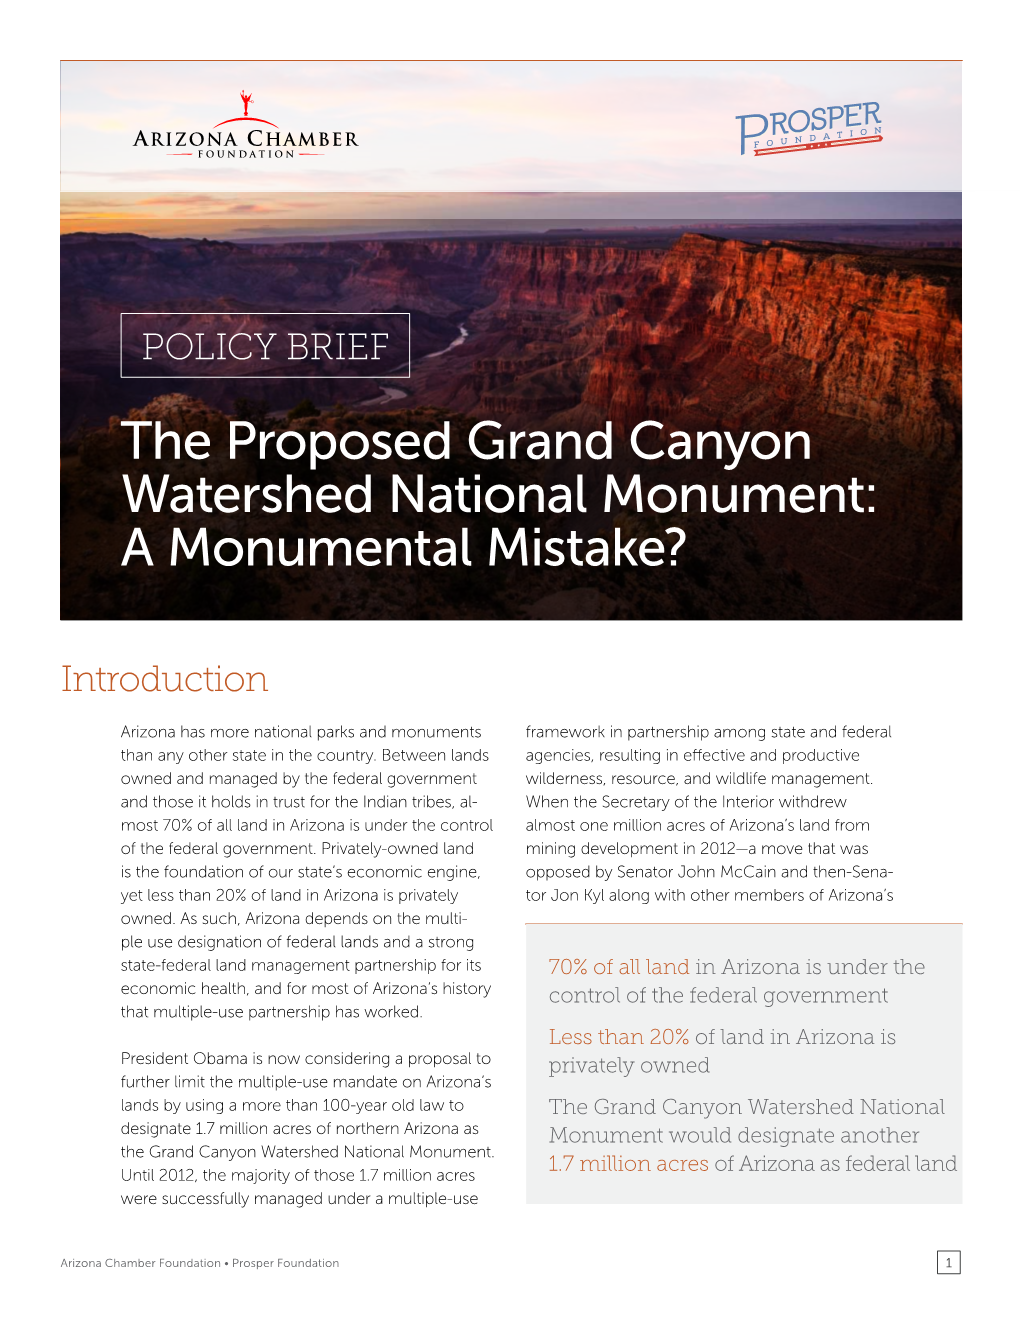 The Proposed Grand Canyon Watershed National Monument: a Monumental Mistake?